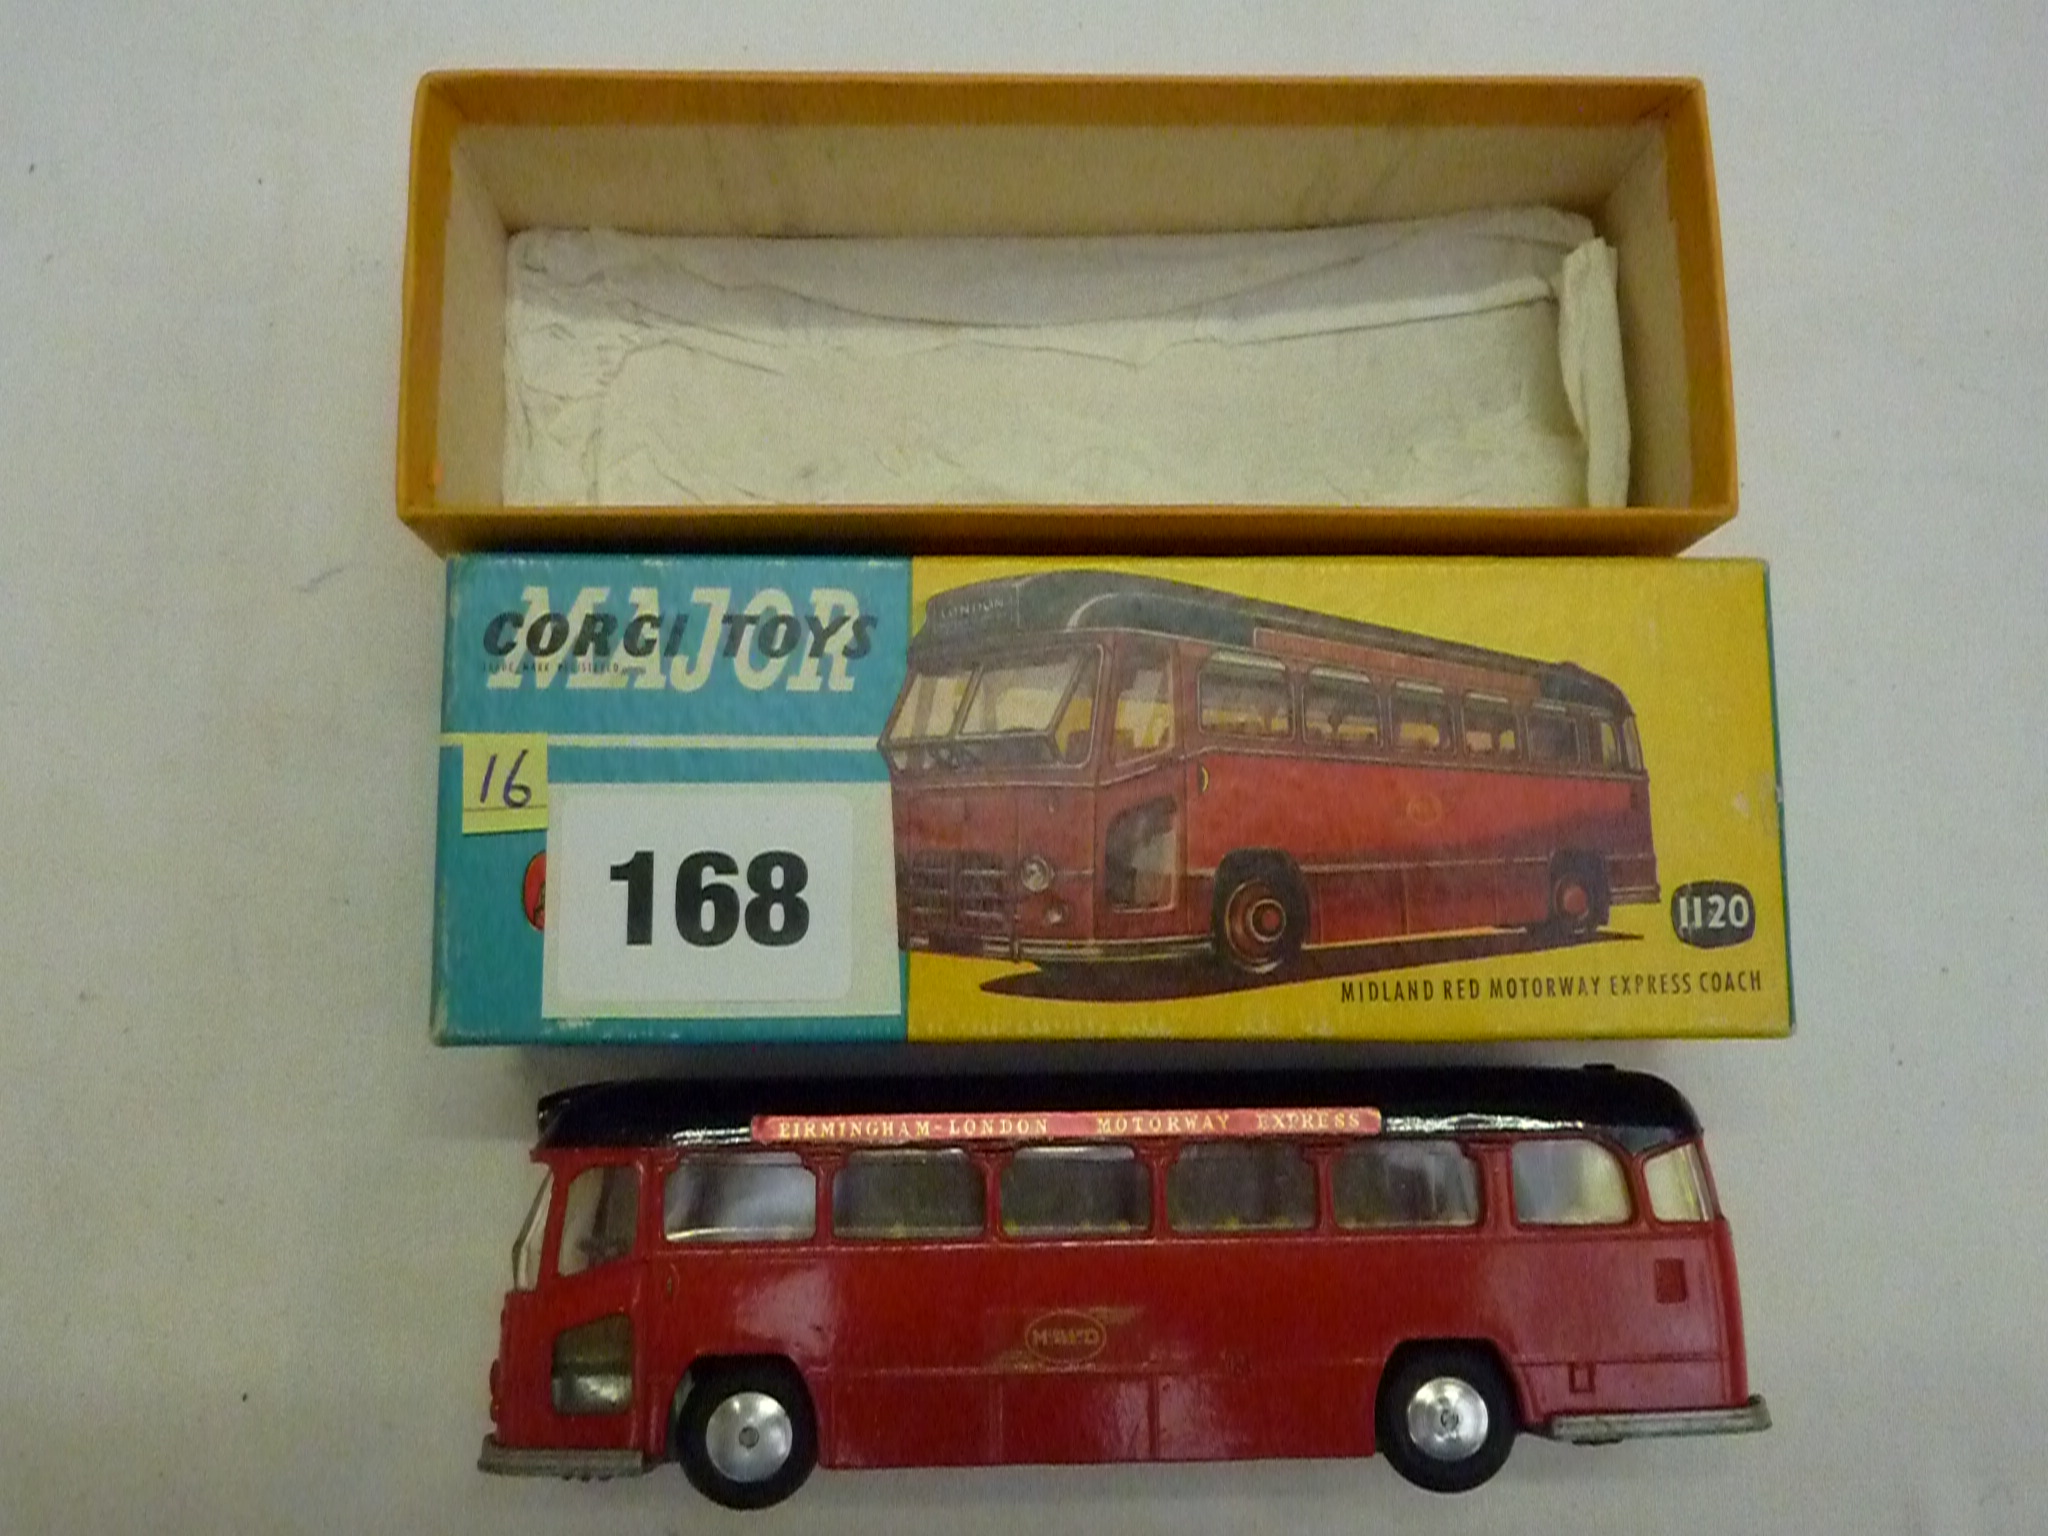 CORGI MAJOR 1120 BMMO / MIDLAND RED MOTORWAY EXPRESS COACH BOXED AND IN VERY GOOD CONDITION - Image 2 of 2